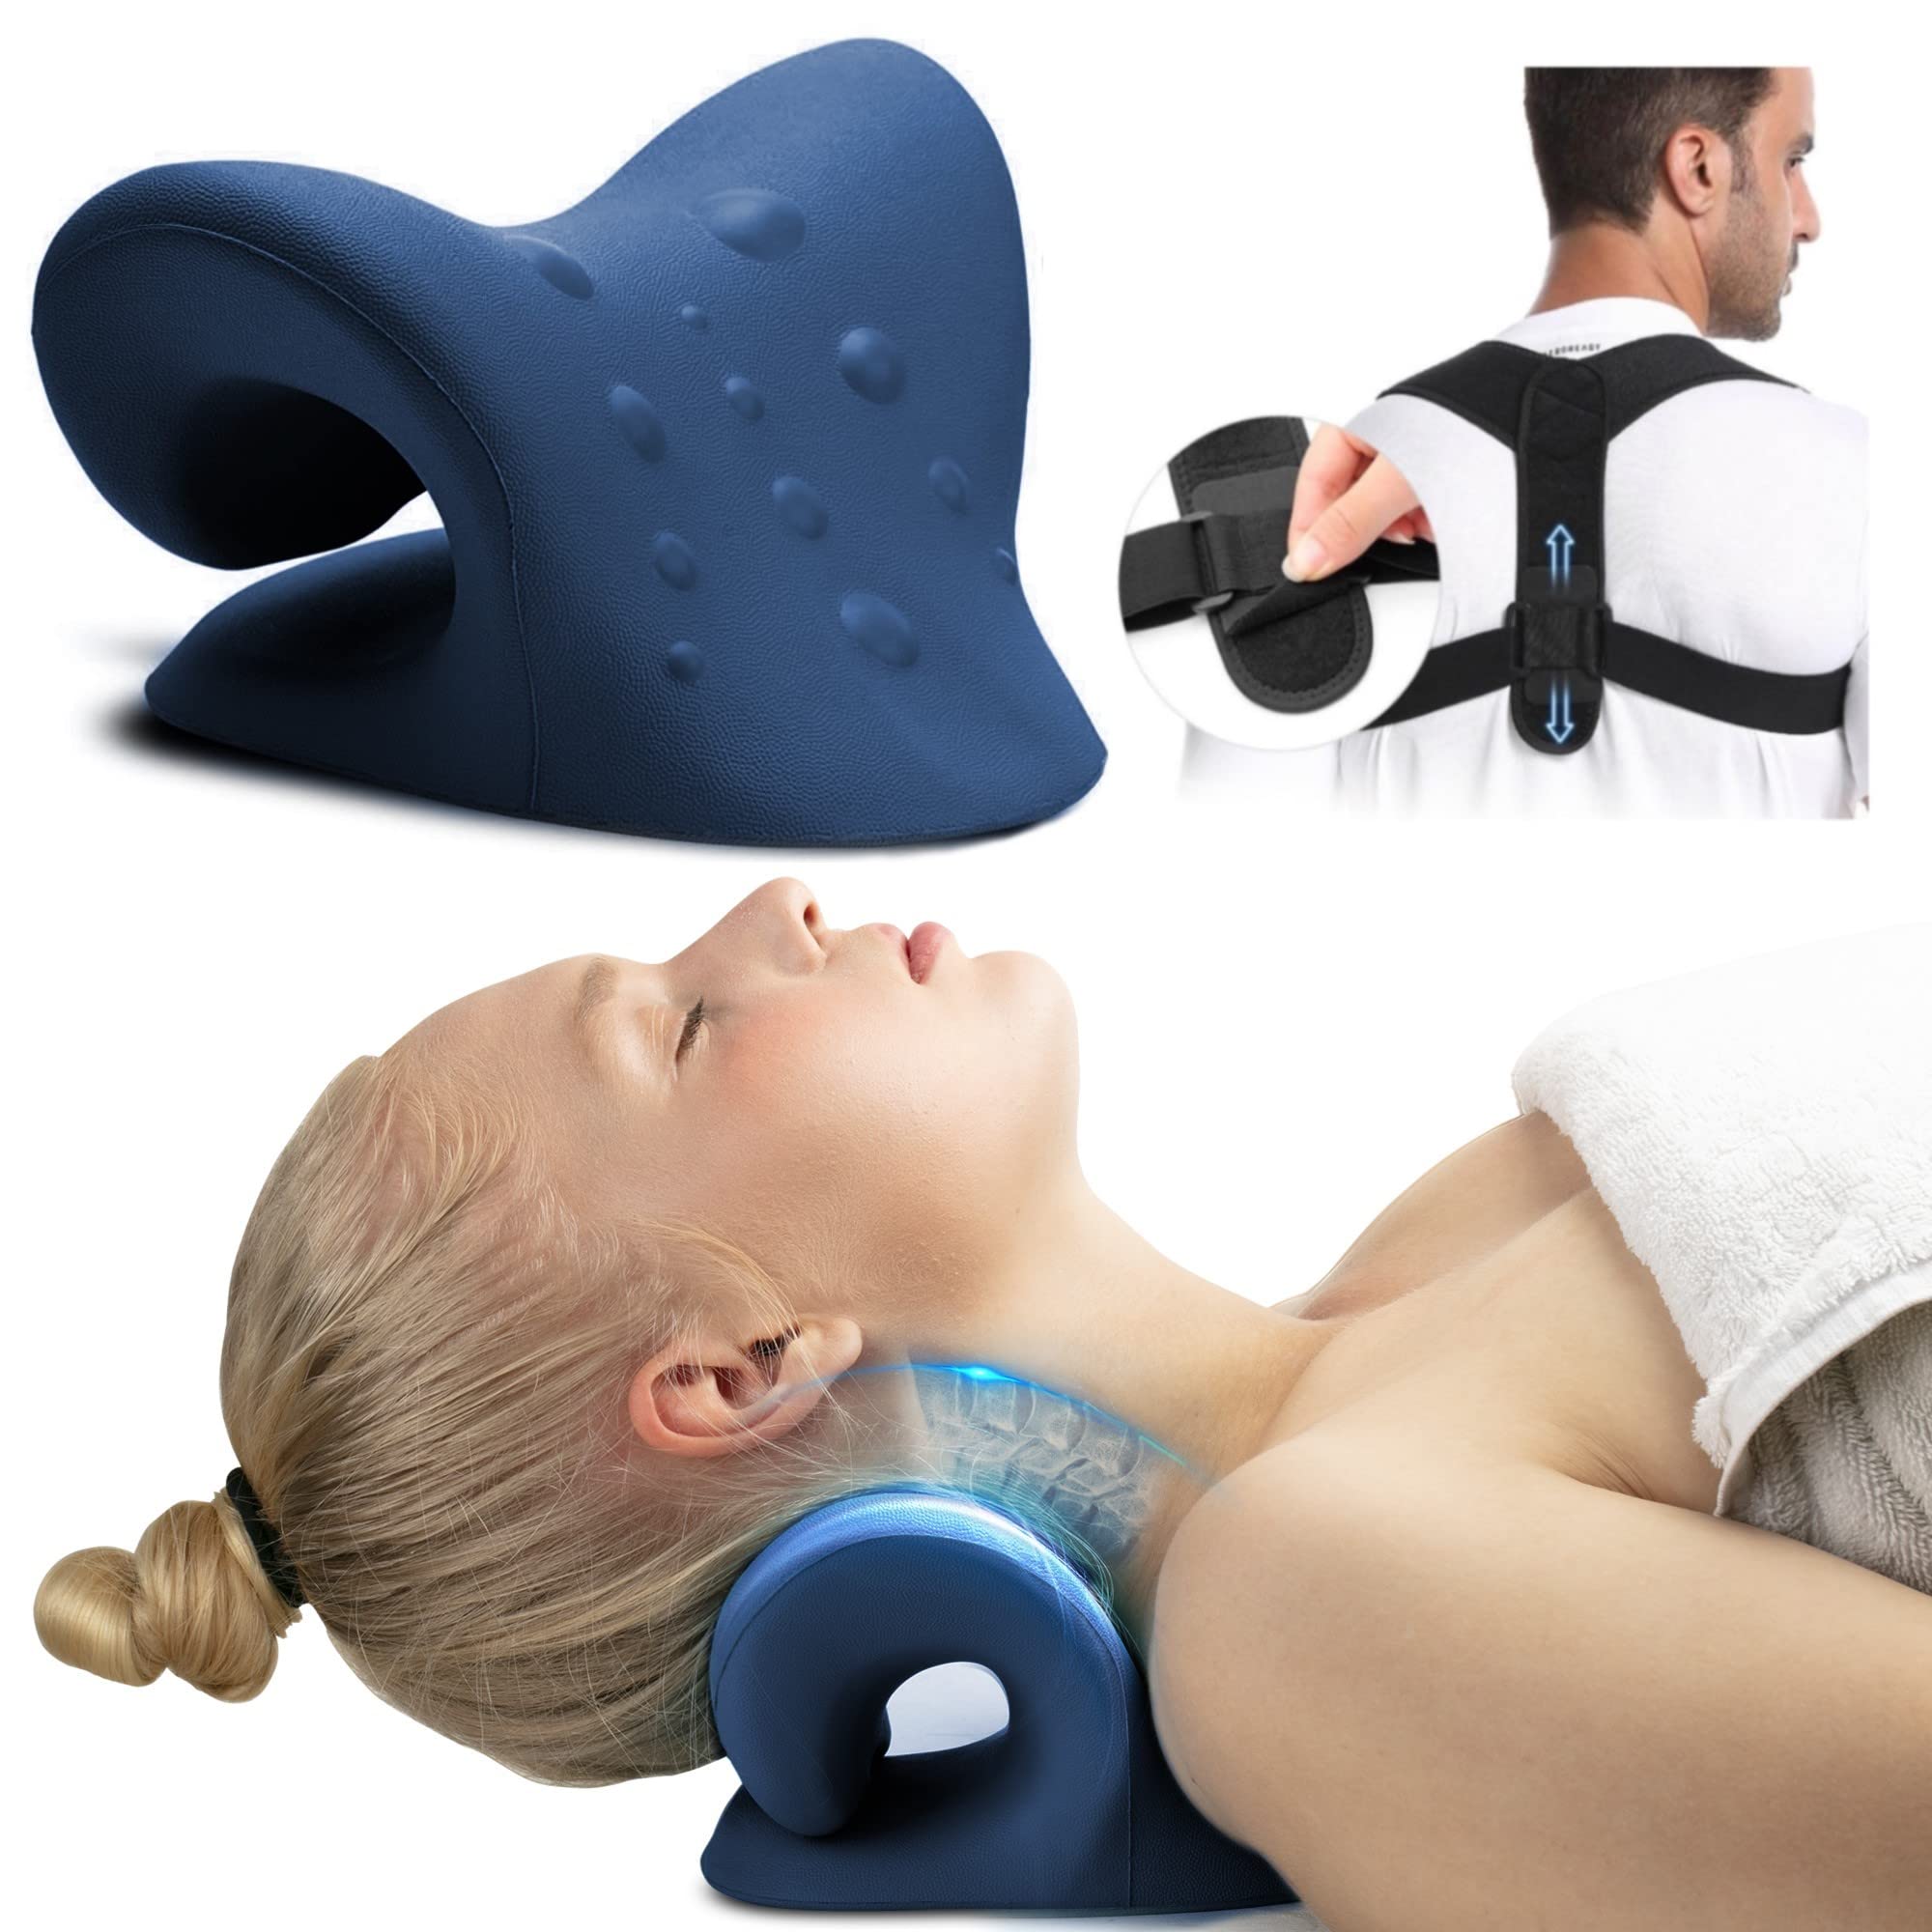 FSA HSA Eligible iBYWM Neck and Shoulder Relaxer with Posture Corrector  Back Brace, Neck Stretcher Cervical Traction Device for Spine Alignment,  Upper Back Support Adjustable Straightener (Dark Blue)